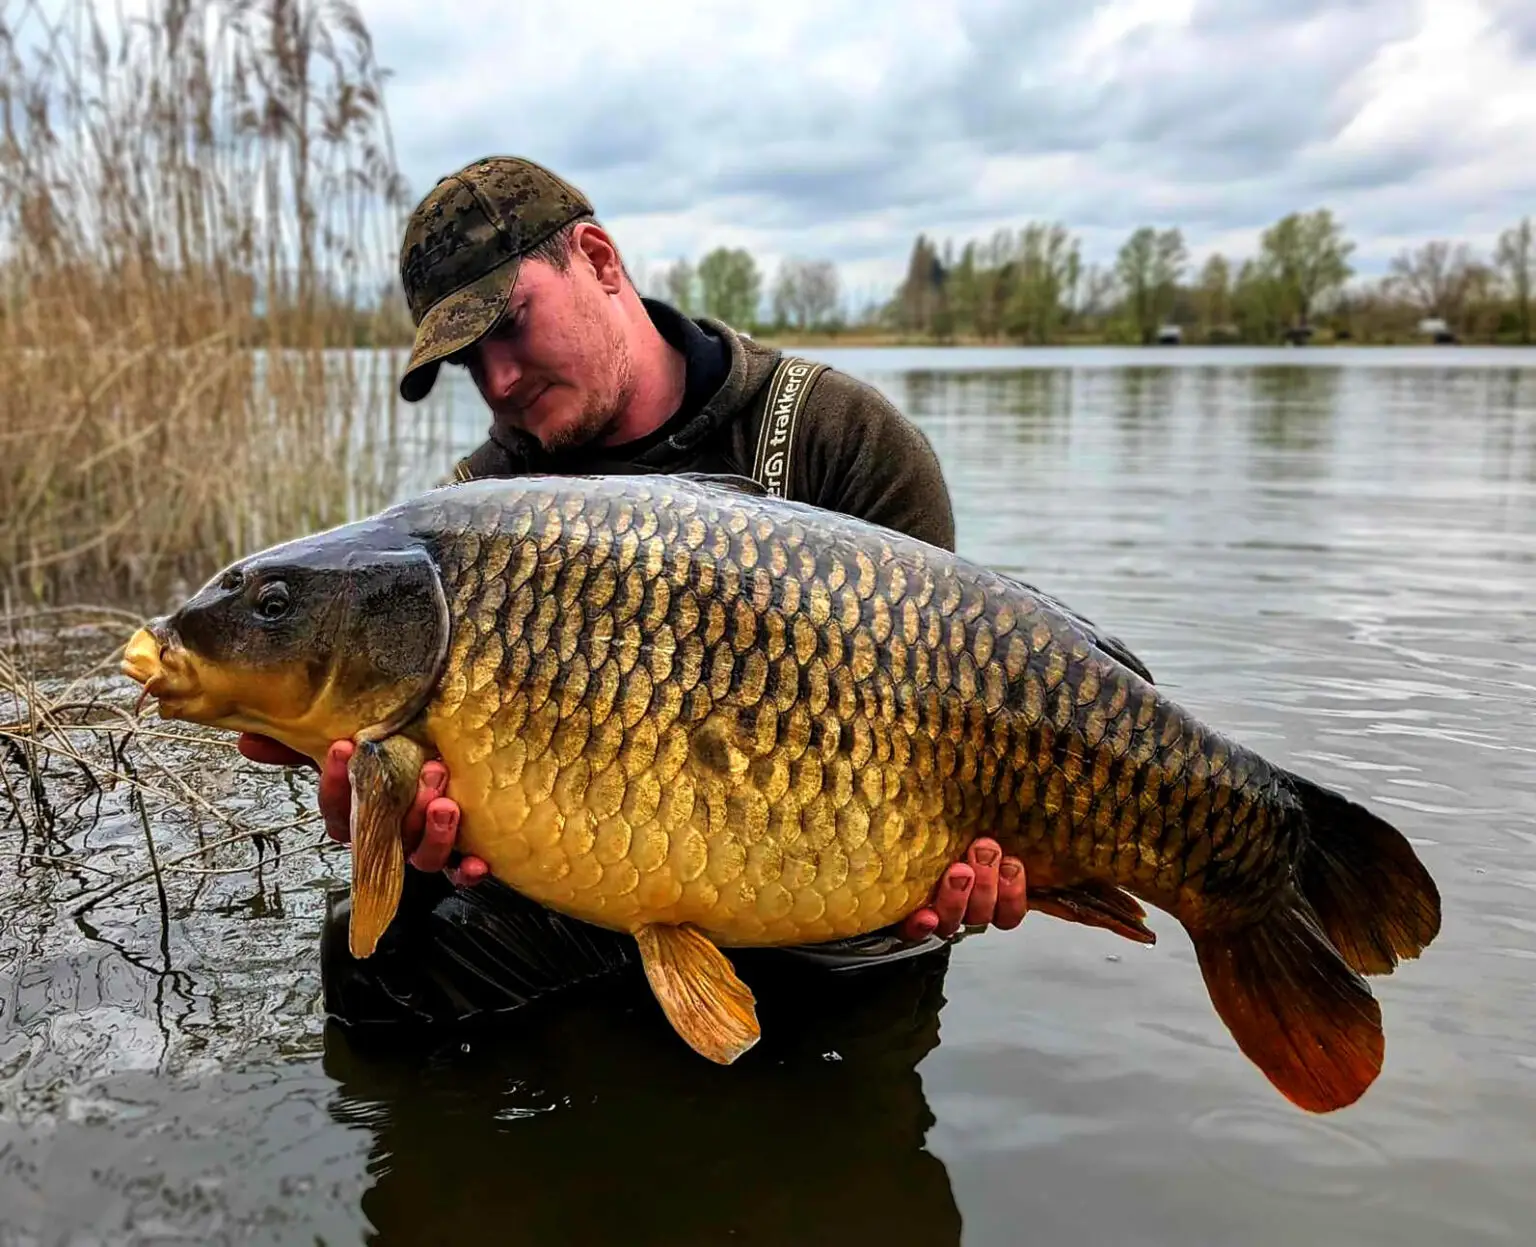 Steve With a stunning 42:8lb common from Bluebells Lakes